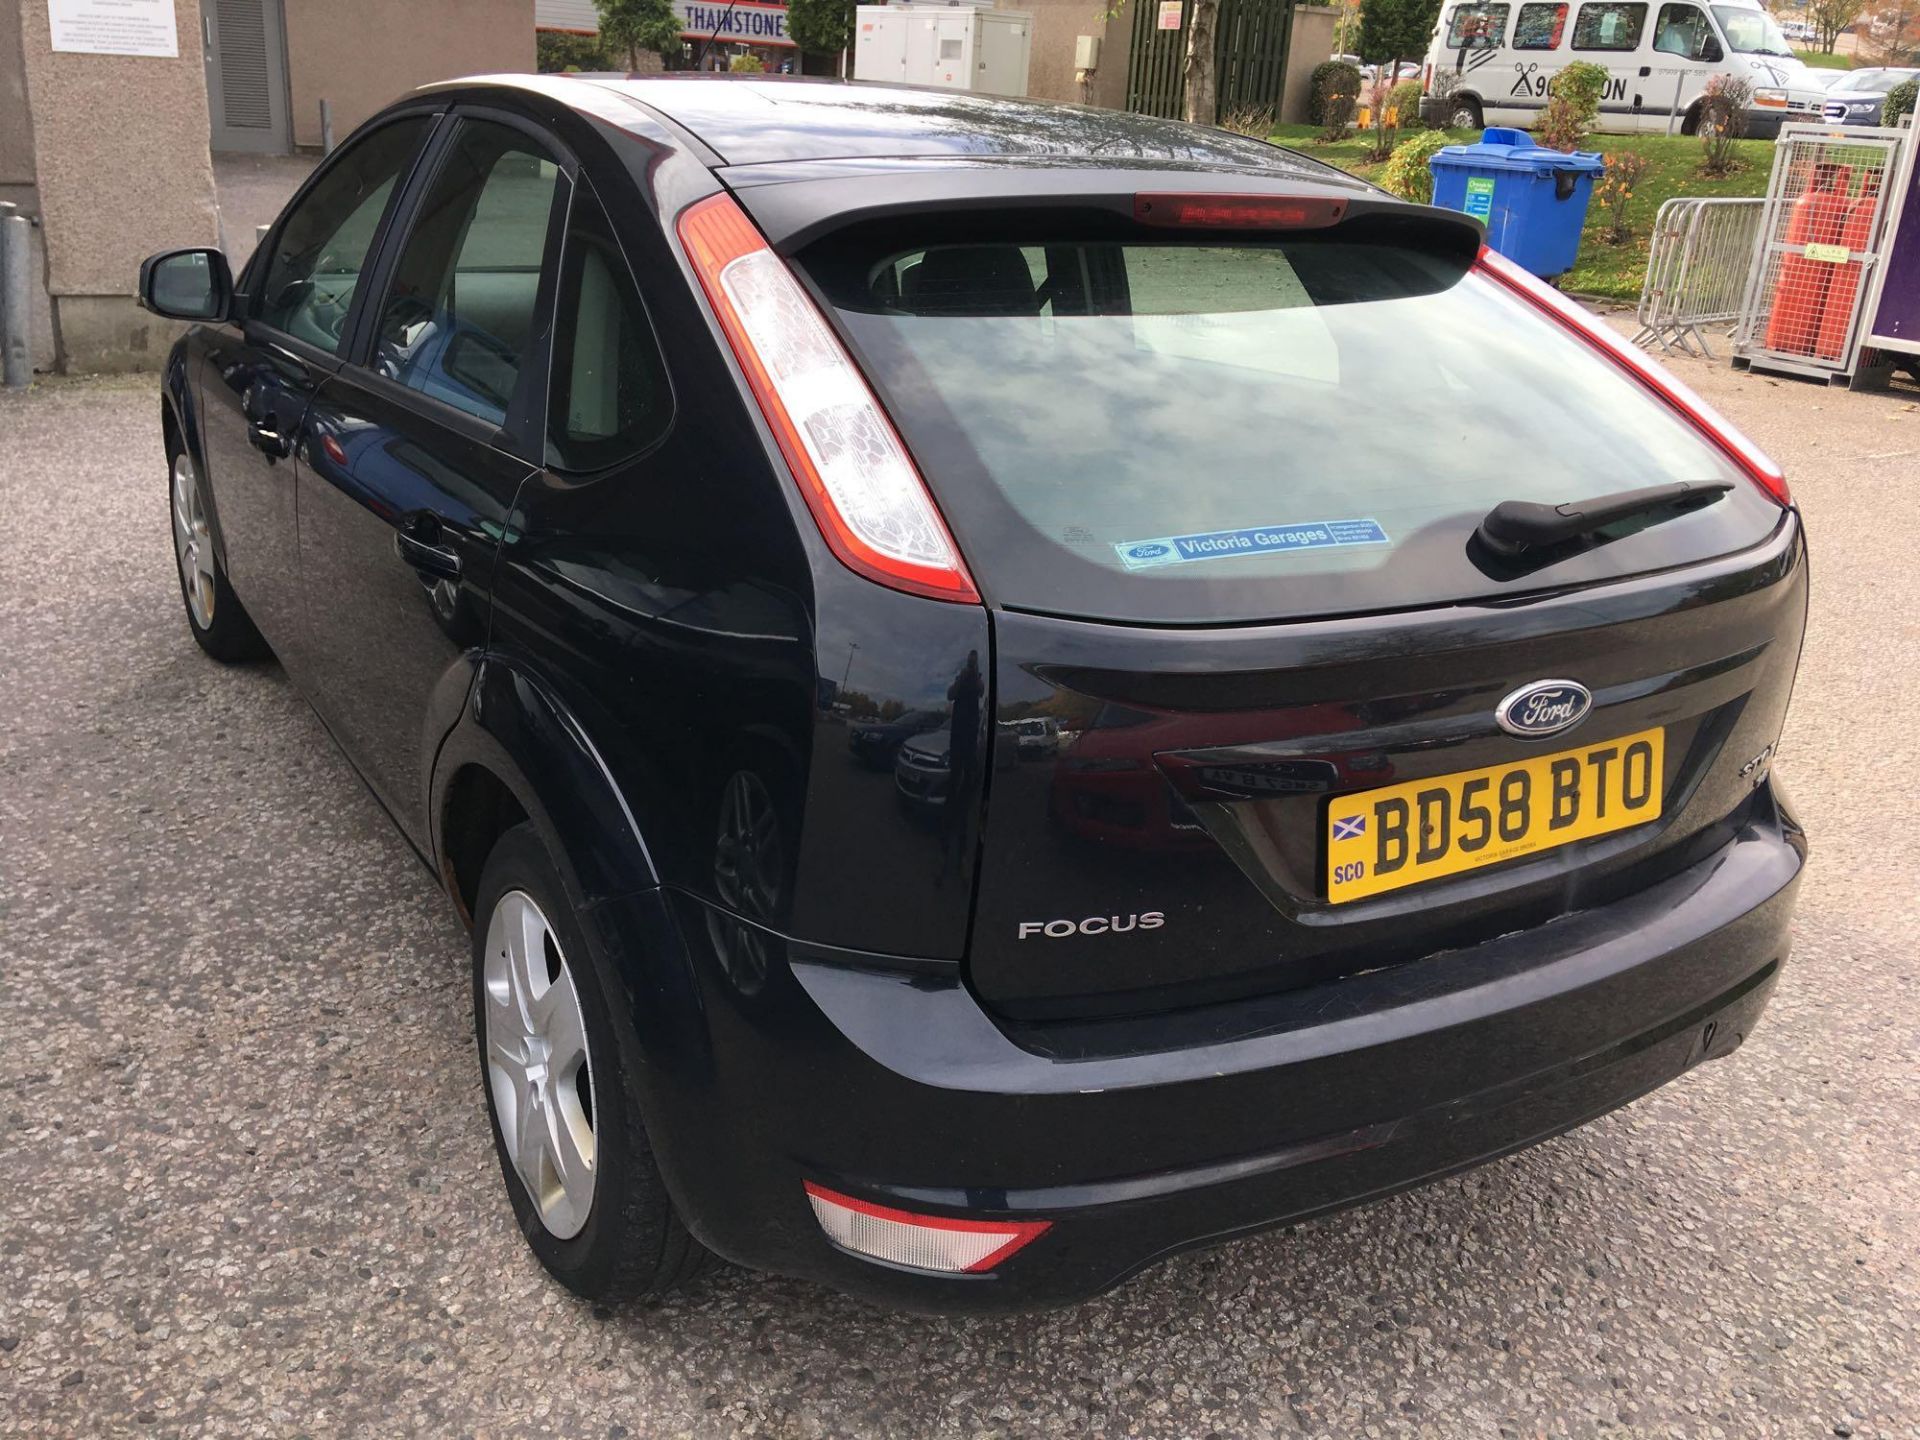 Ford Focus Style 100 - 1596cc 5 Door - Image 2 of 2